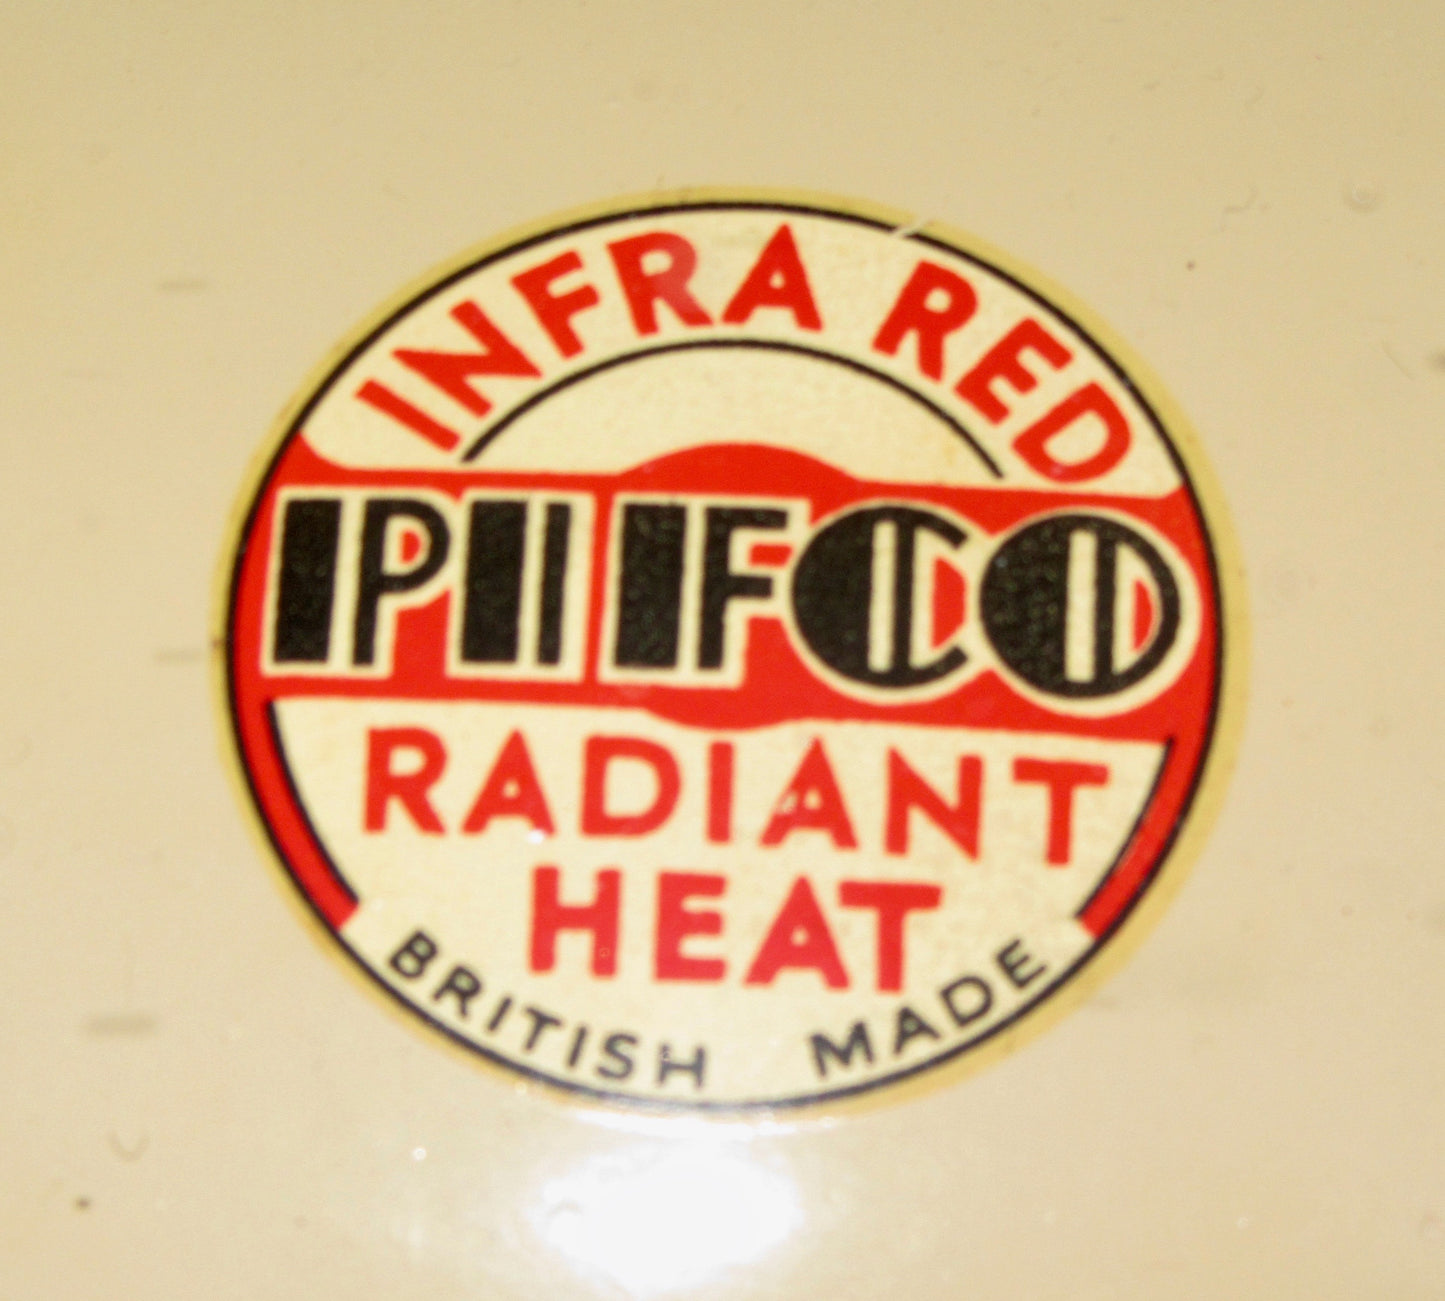 1950s PIFCO Infra Red Medical Lamp Repurposed As A Desk Lamp